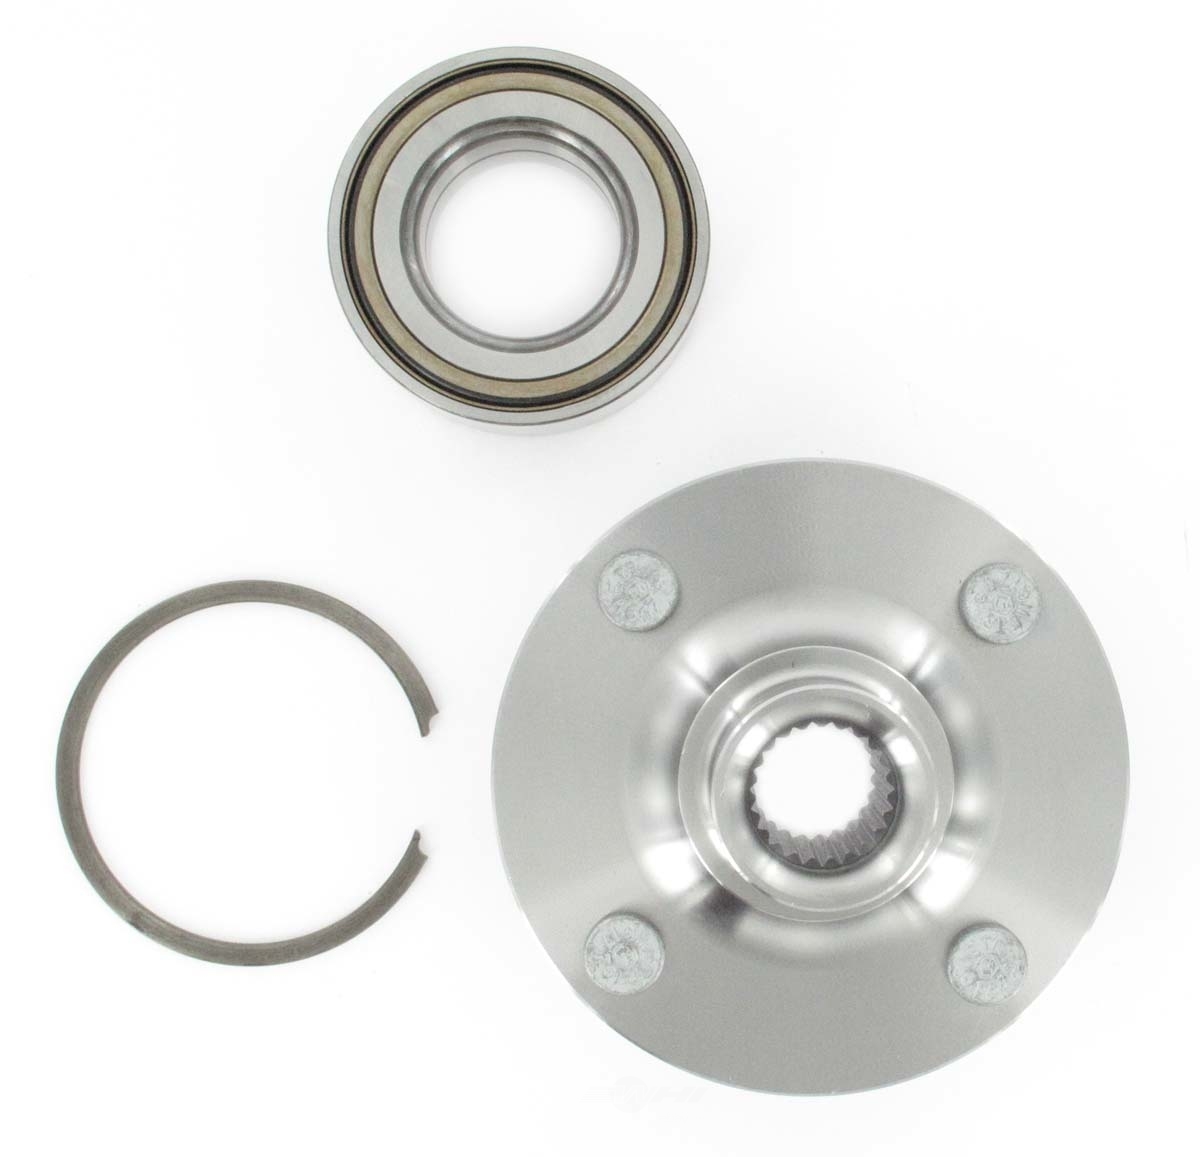 SKF (CHICAGO RAWHIDE) - Axle Bearing and Hub Assembly Repair Kit - SKF BR930181K